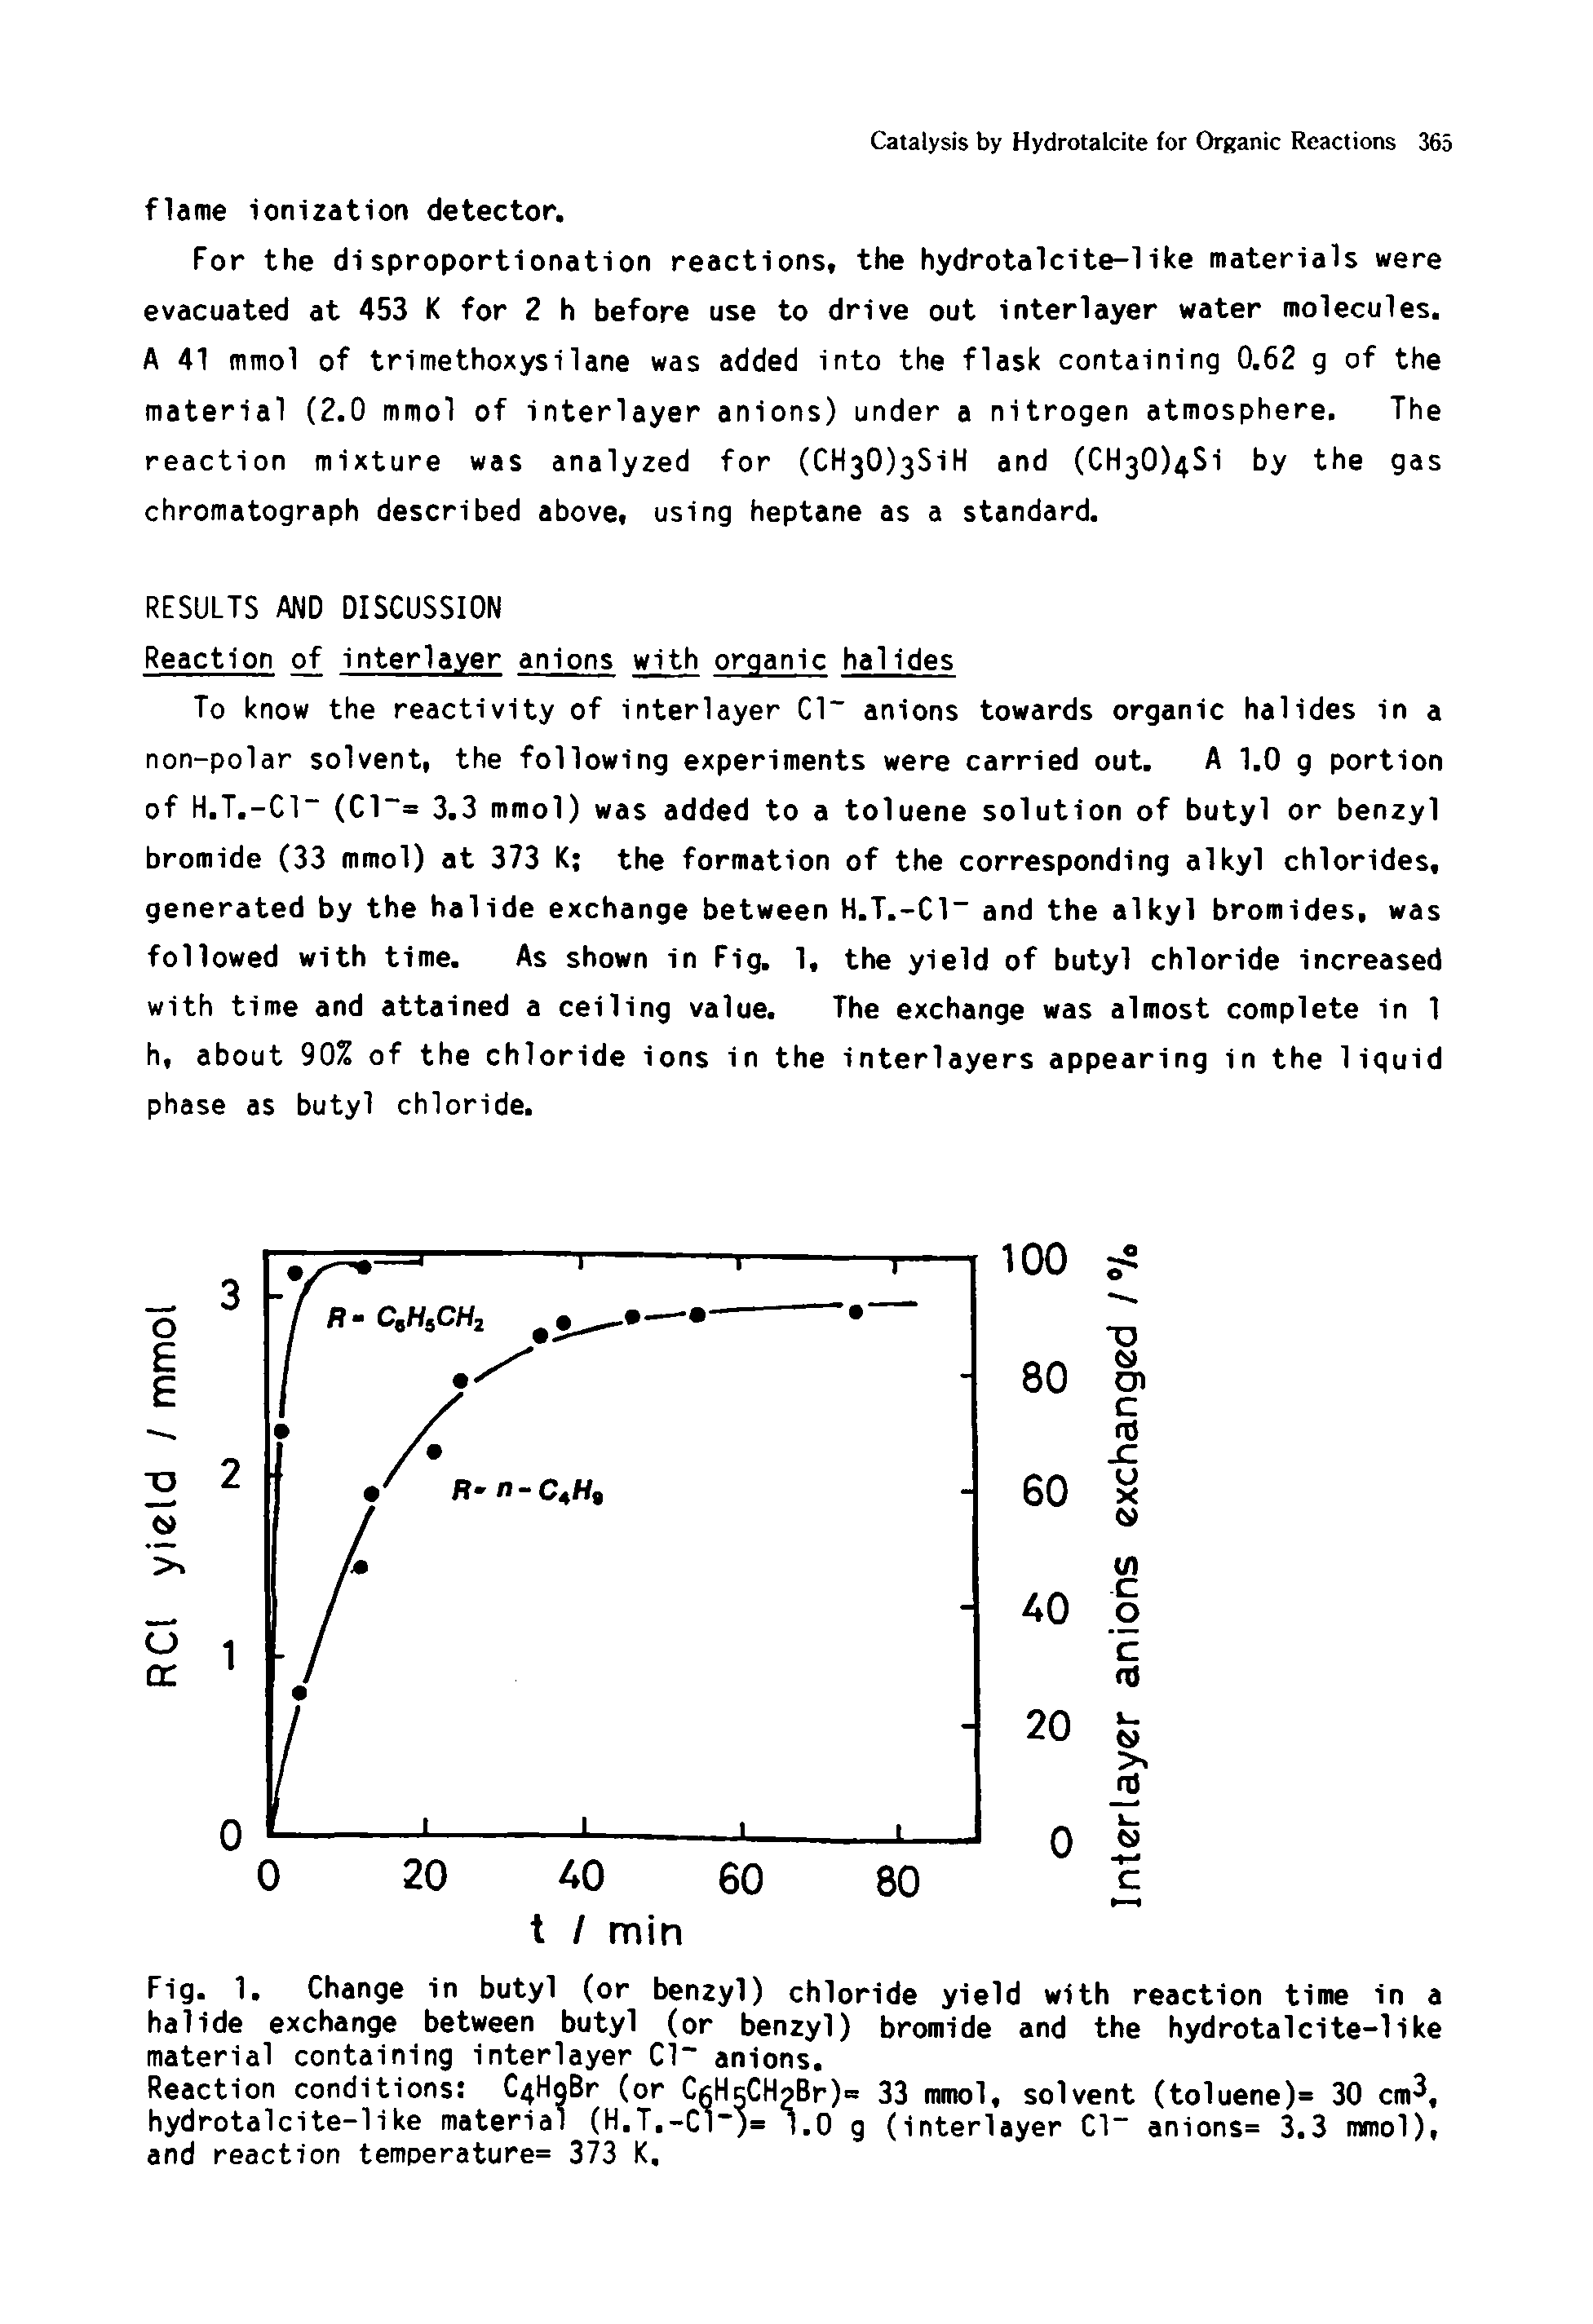 Fig. 1. Change in butyl (or benzyl) chloride yield with reaction time in a halide exchange between butyl (or benzyl) bromide and the hydrotalcite-1ike material containing interlayer Cl anions.